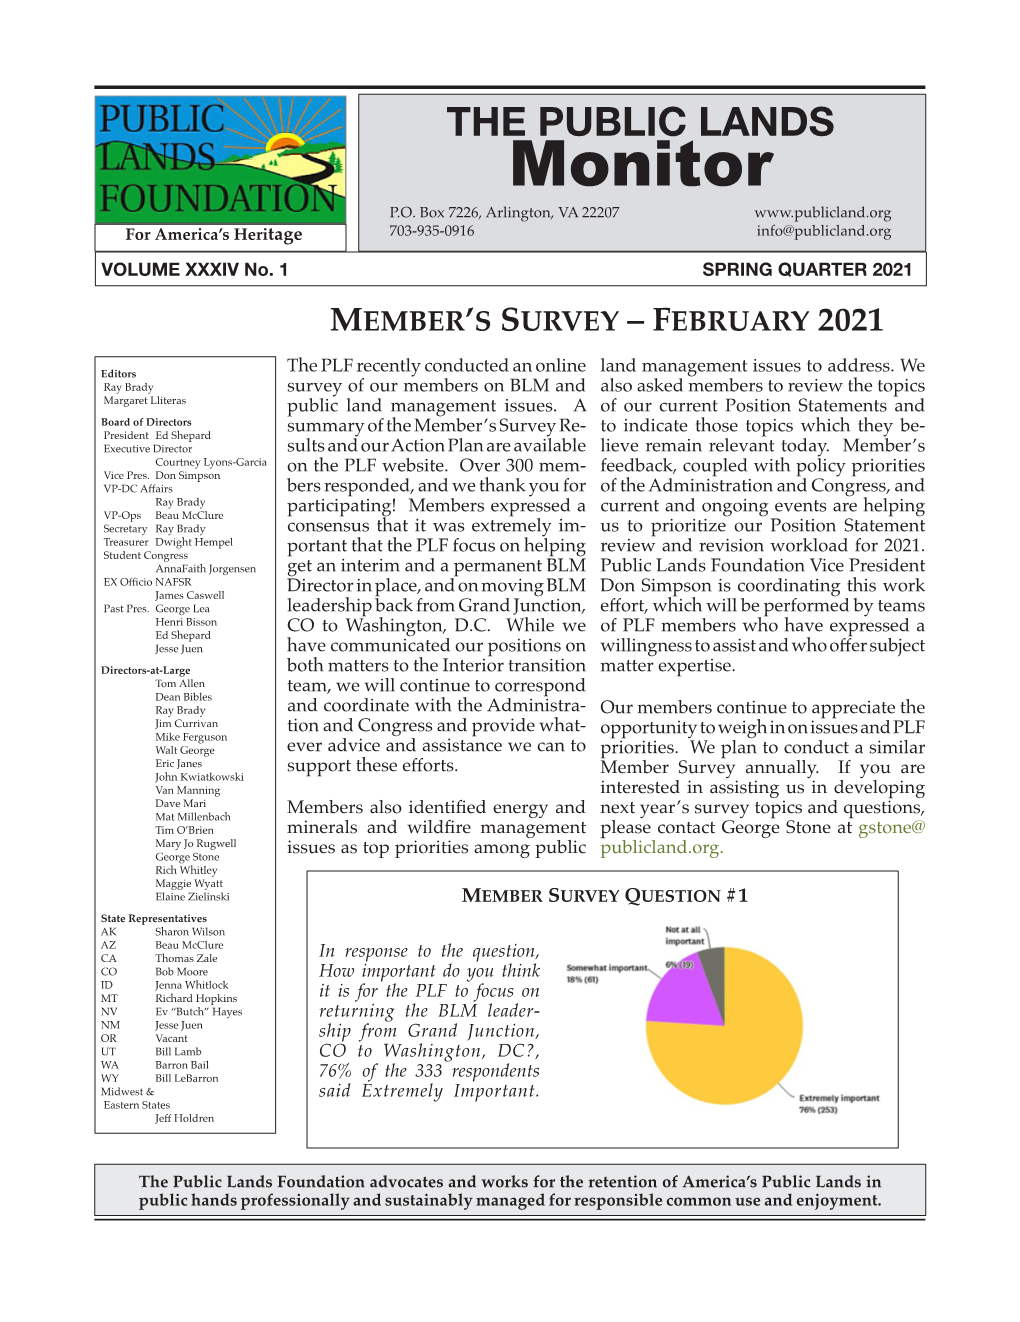 Read the Spring 2021 Edition of the Public Lands Monitor!